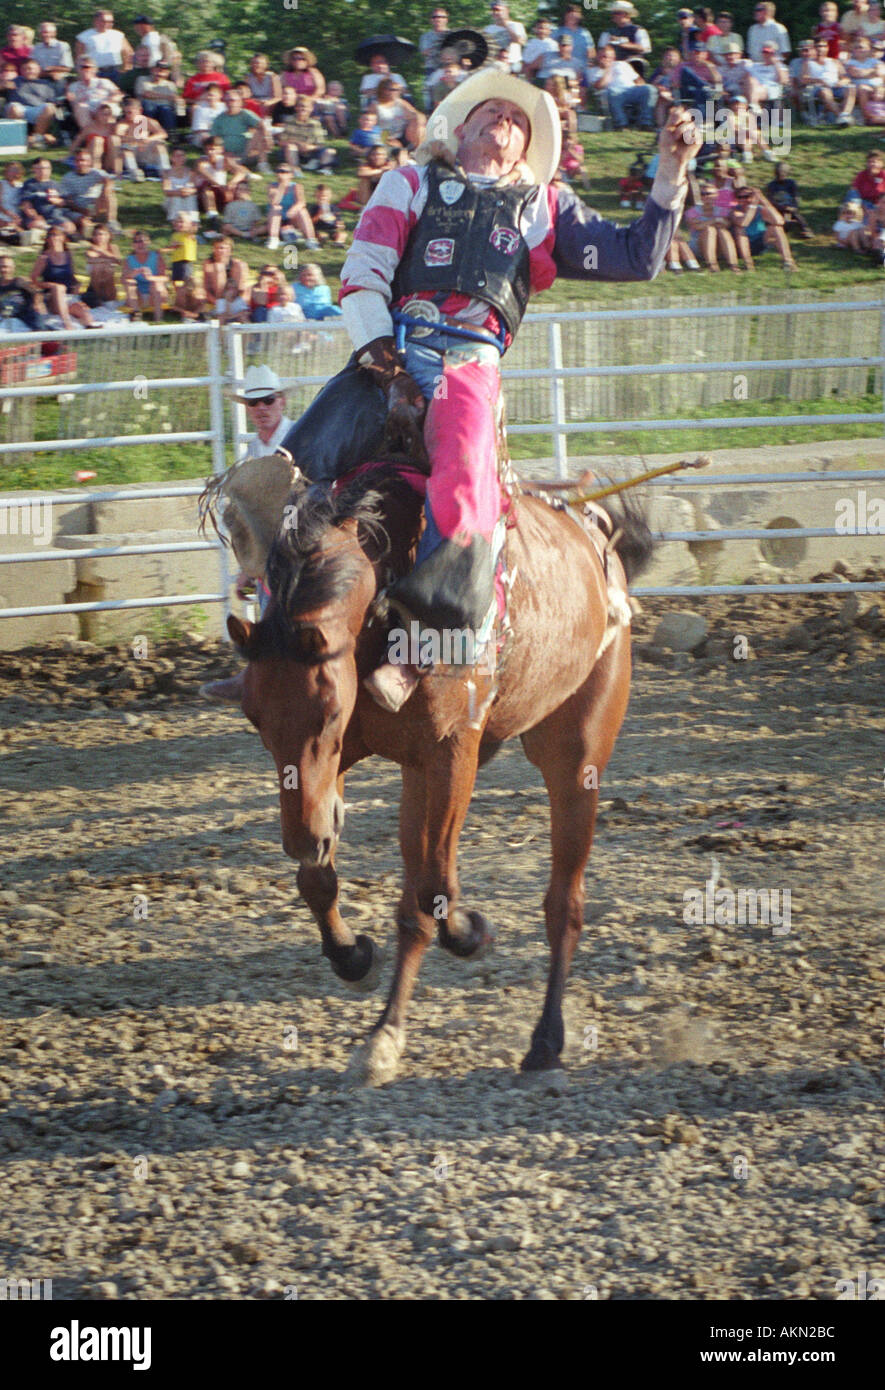 Rodeo horse sporting event Stock Photo